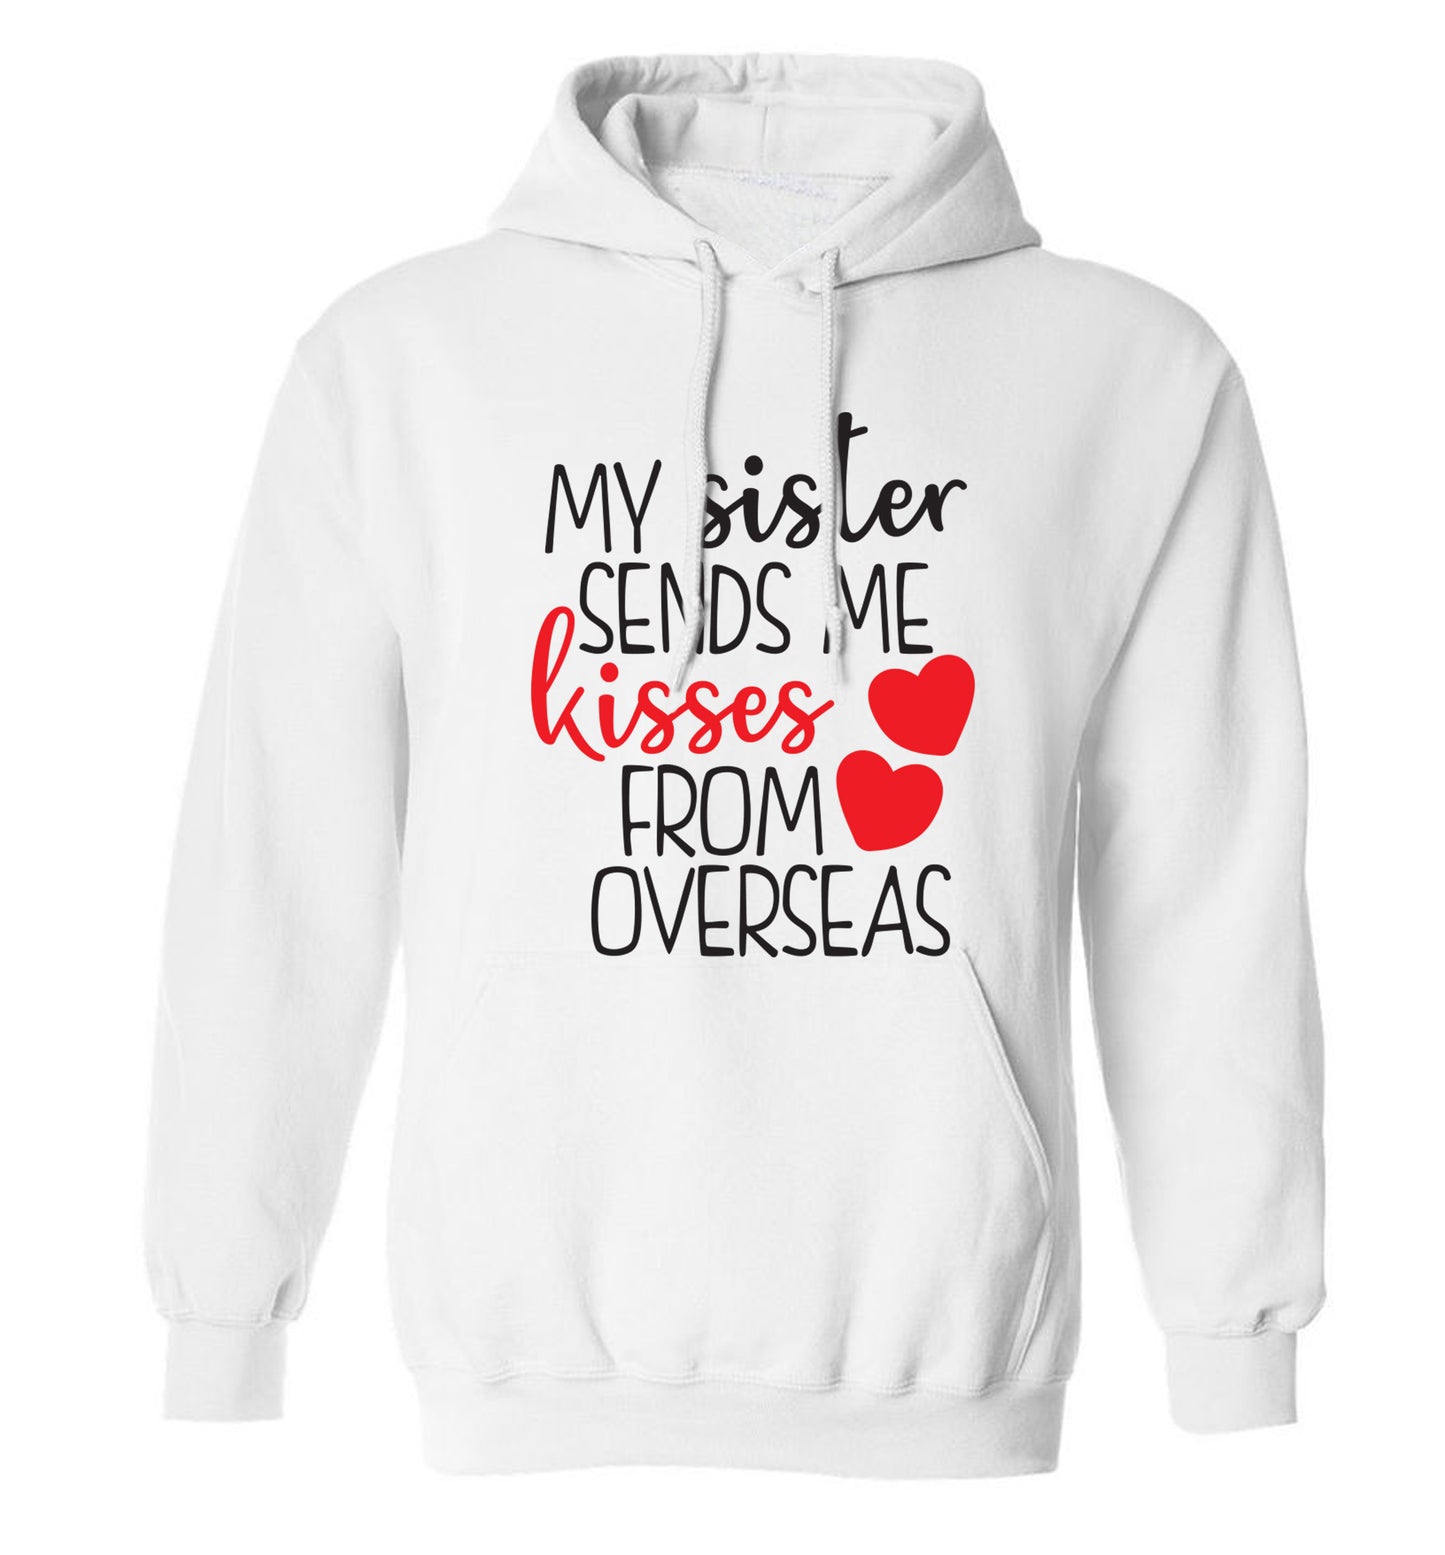 My sister sends me kisses from overseas adults unisex white hoodie 2XL